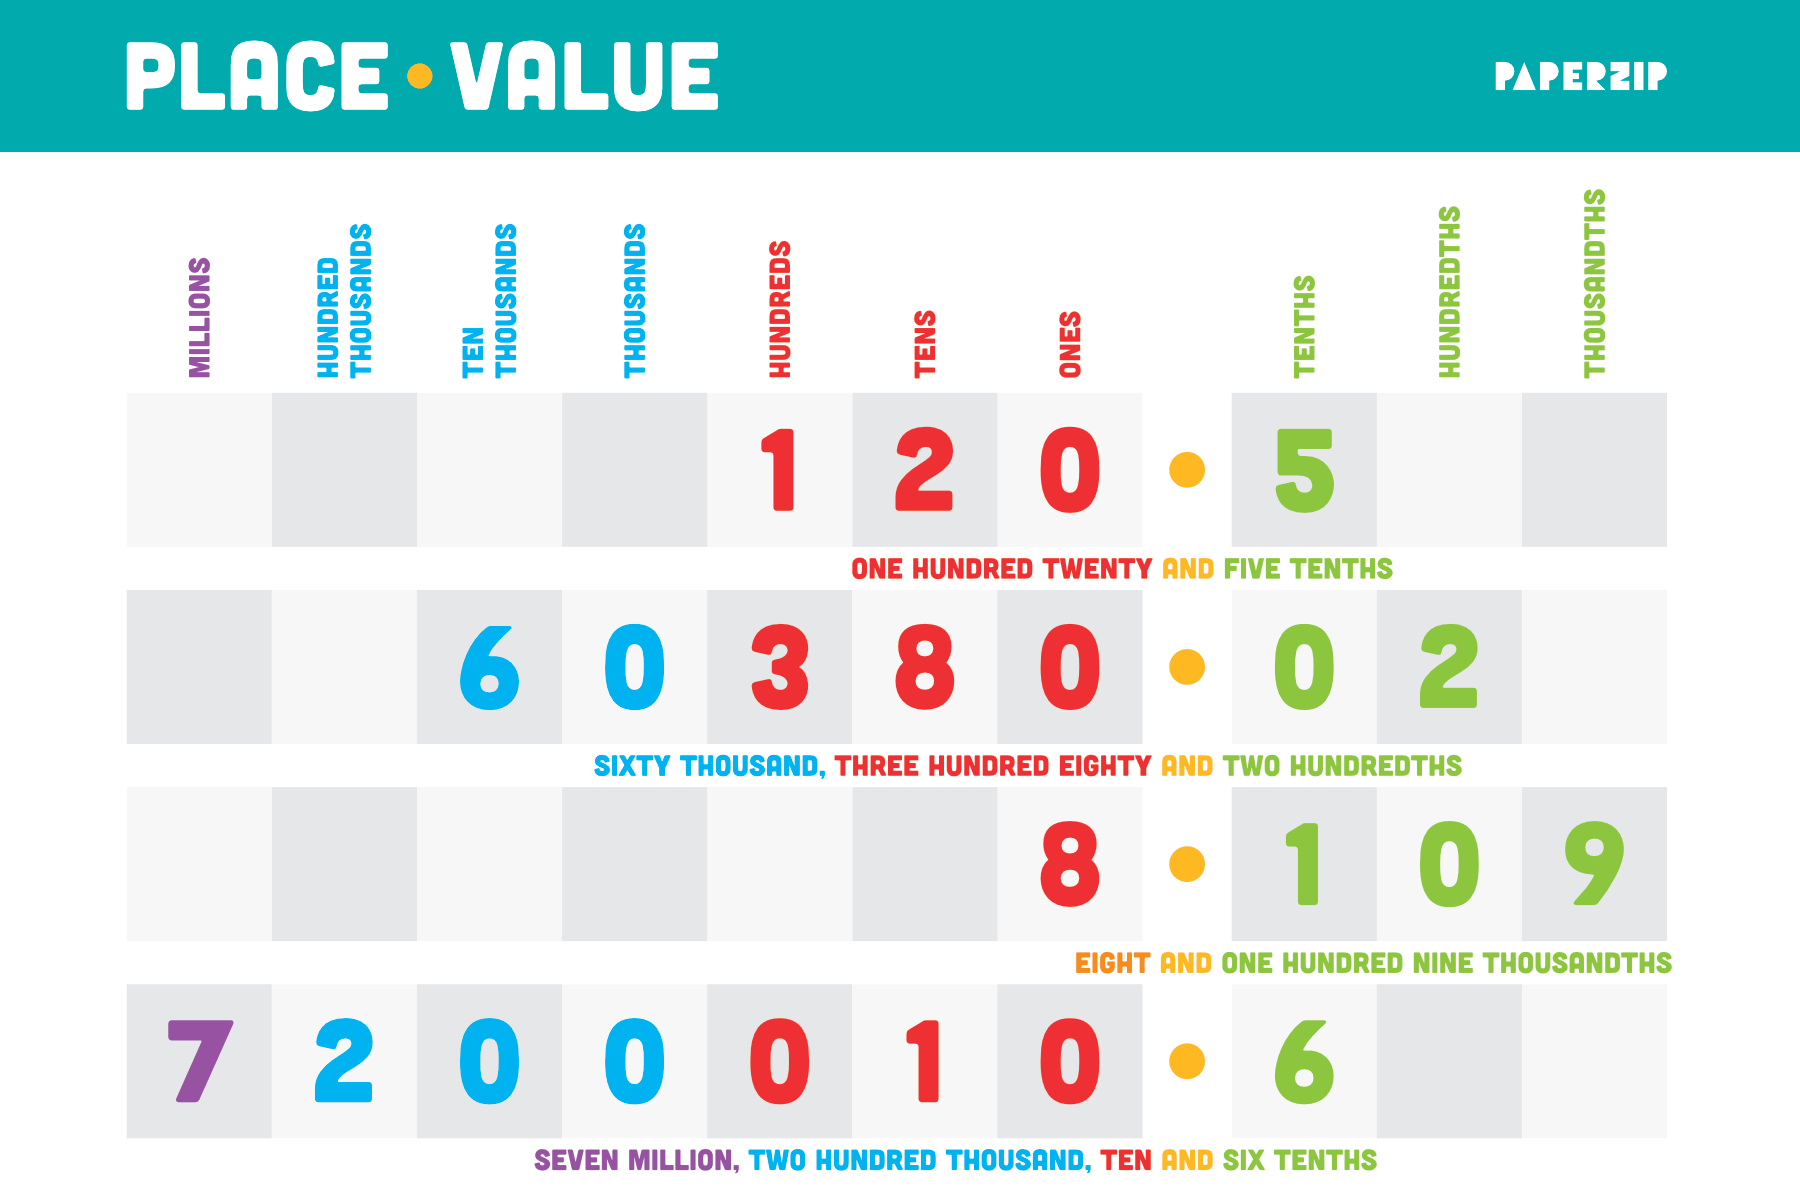 Place Value Poster and Numbers – PAPERZIP